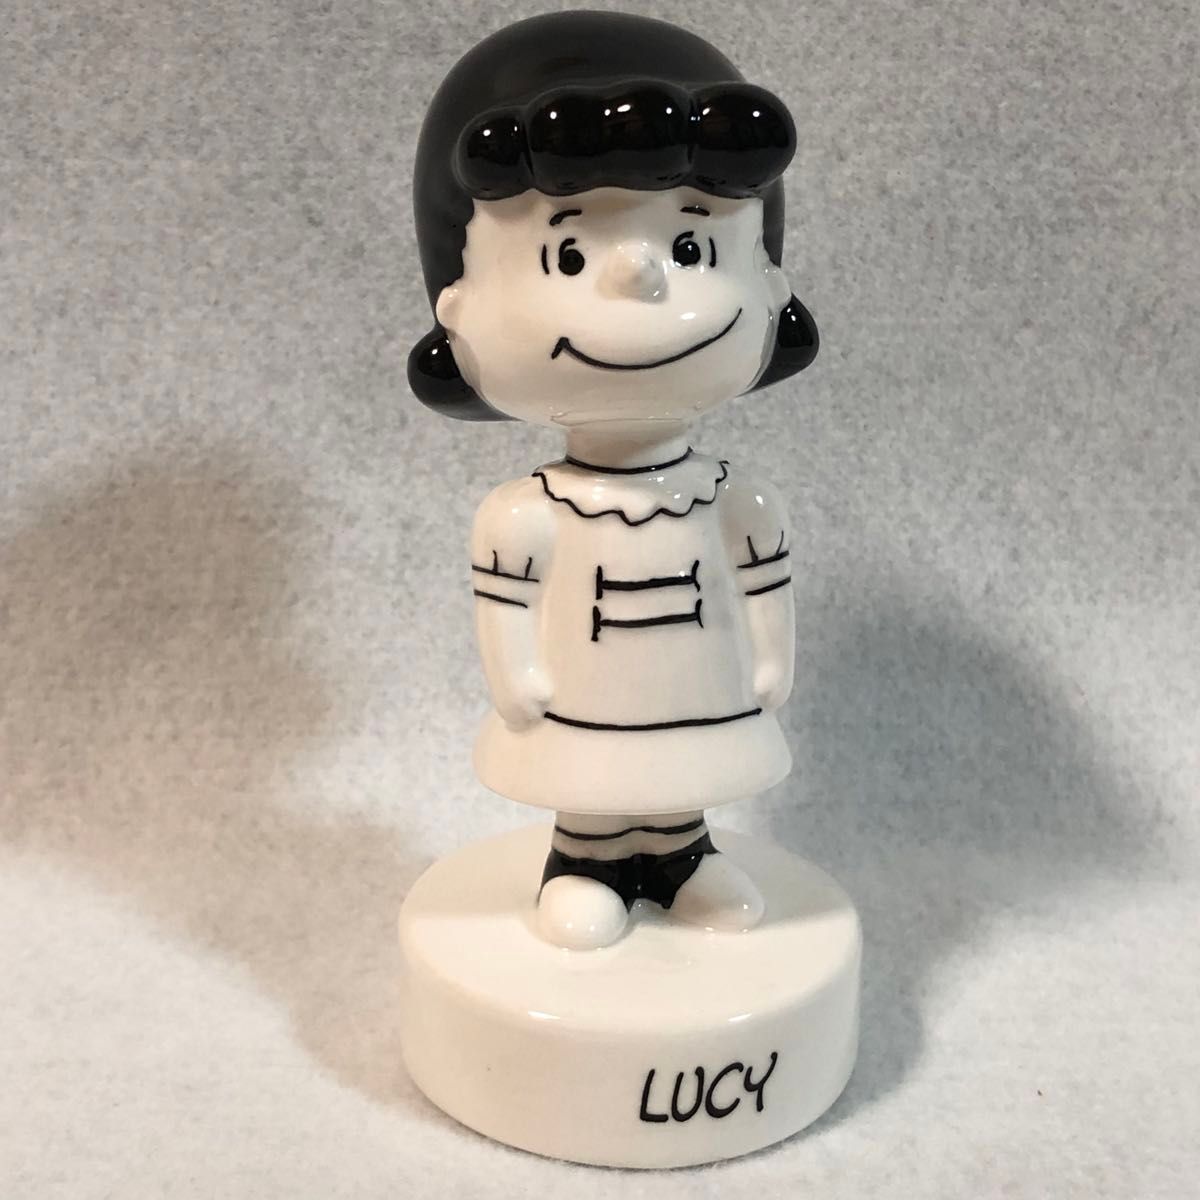 PEANUTS DEPARTMENT 65周年　LUCY  陶器　置物